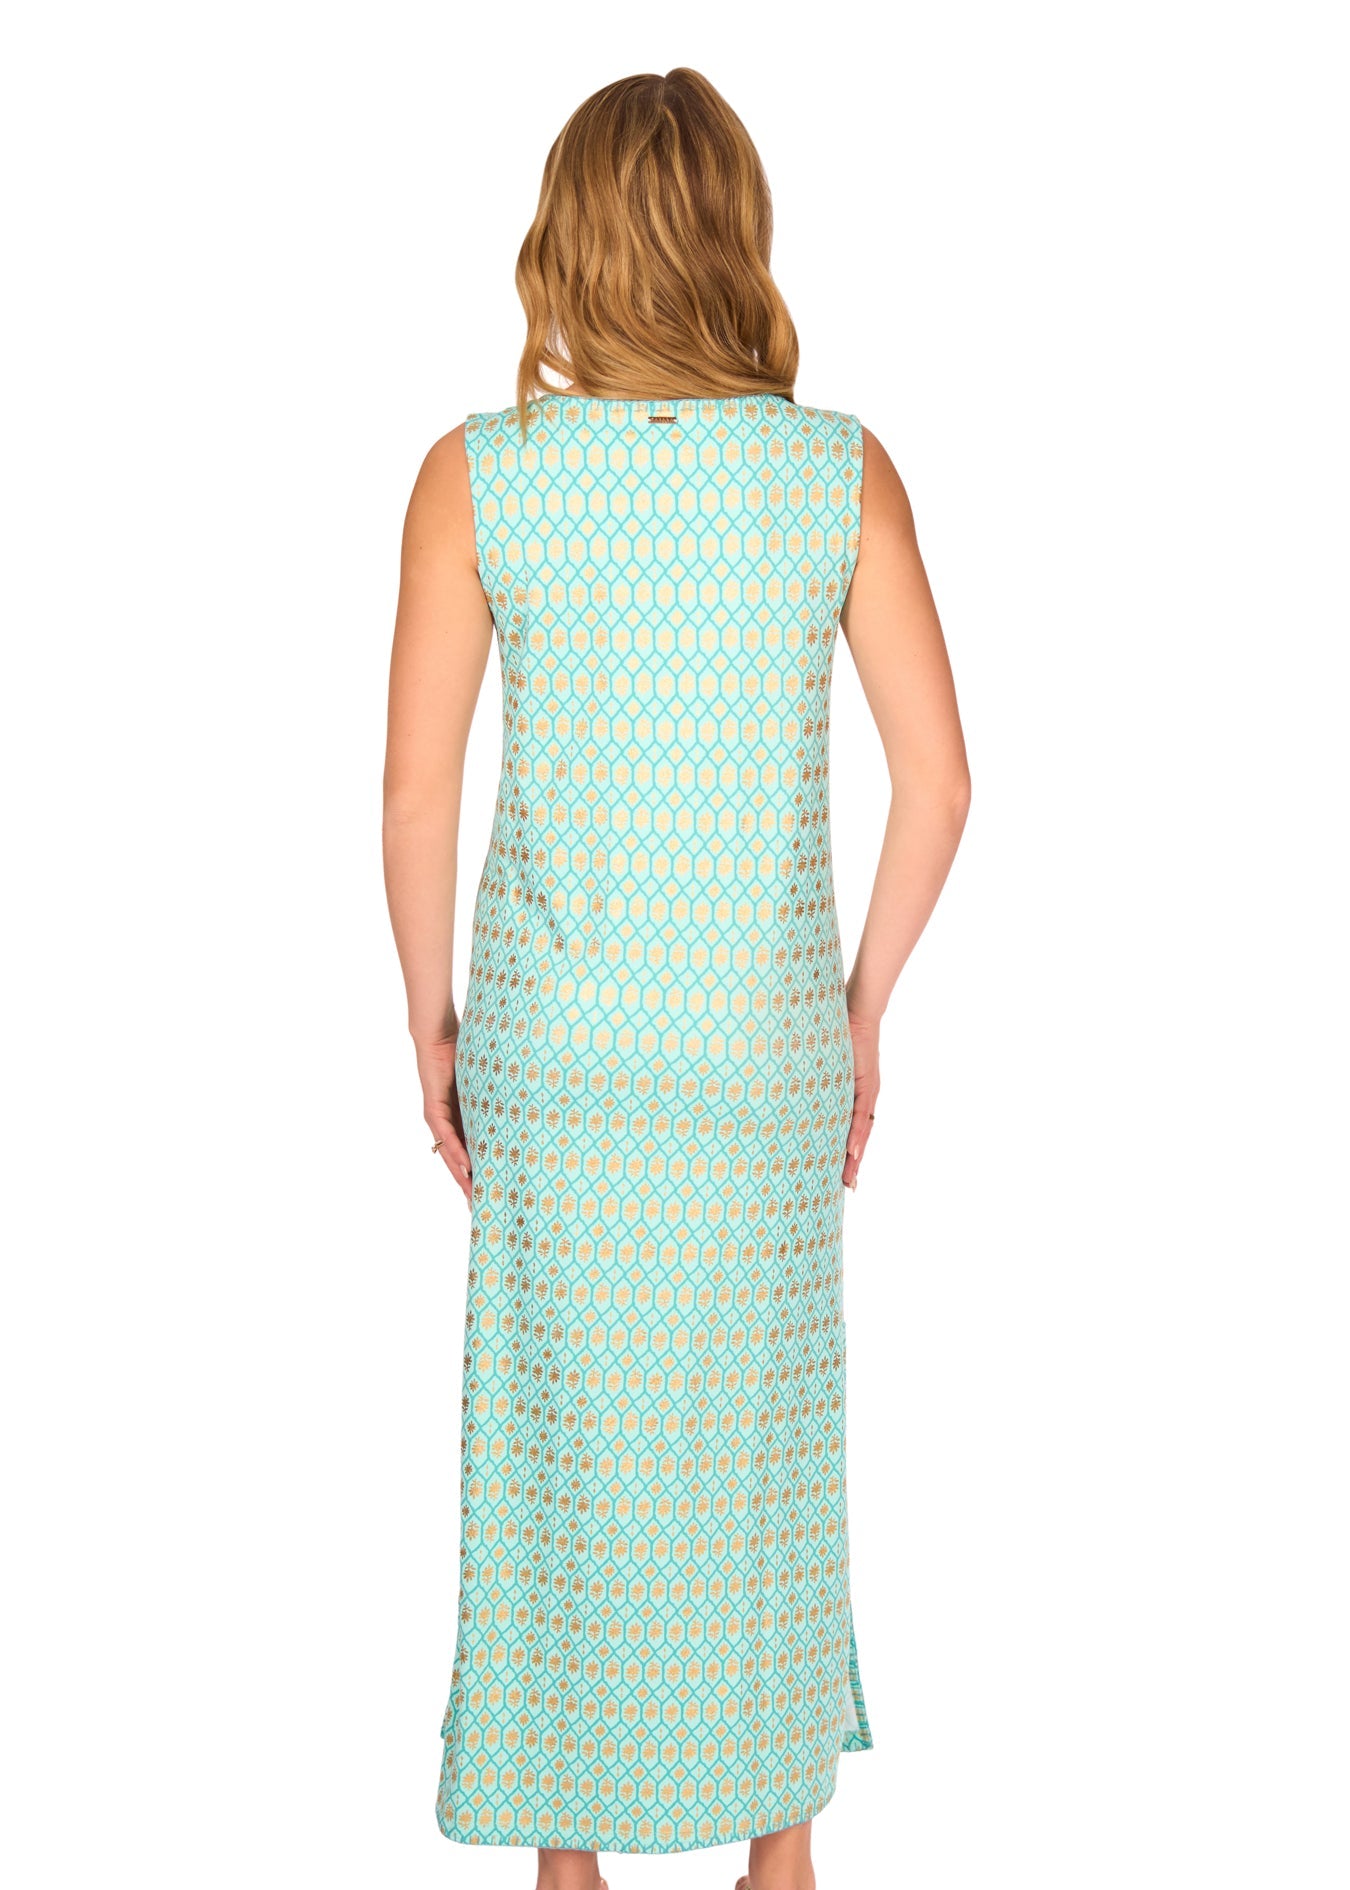 The back of a blonde woman wearing the Aqua Metallic Side Slit Maxi Dress on a white background.